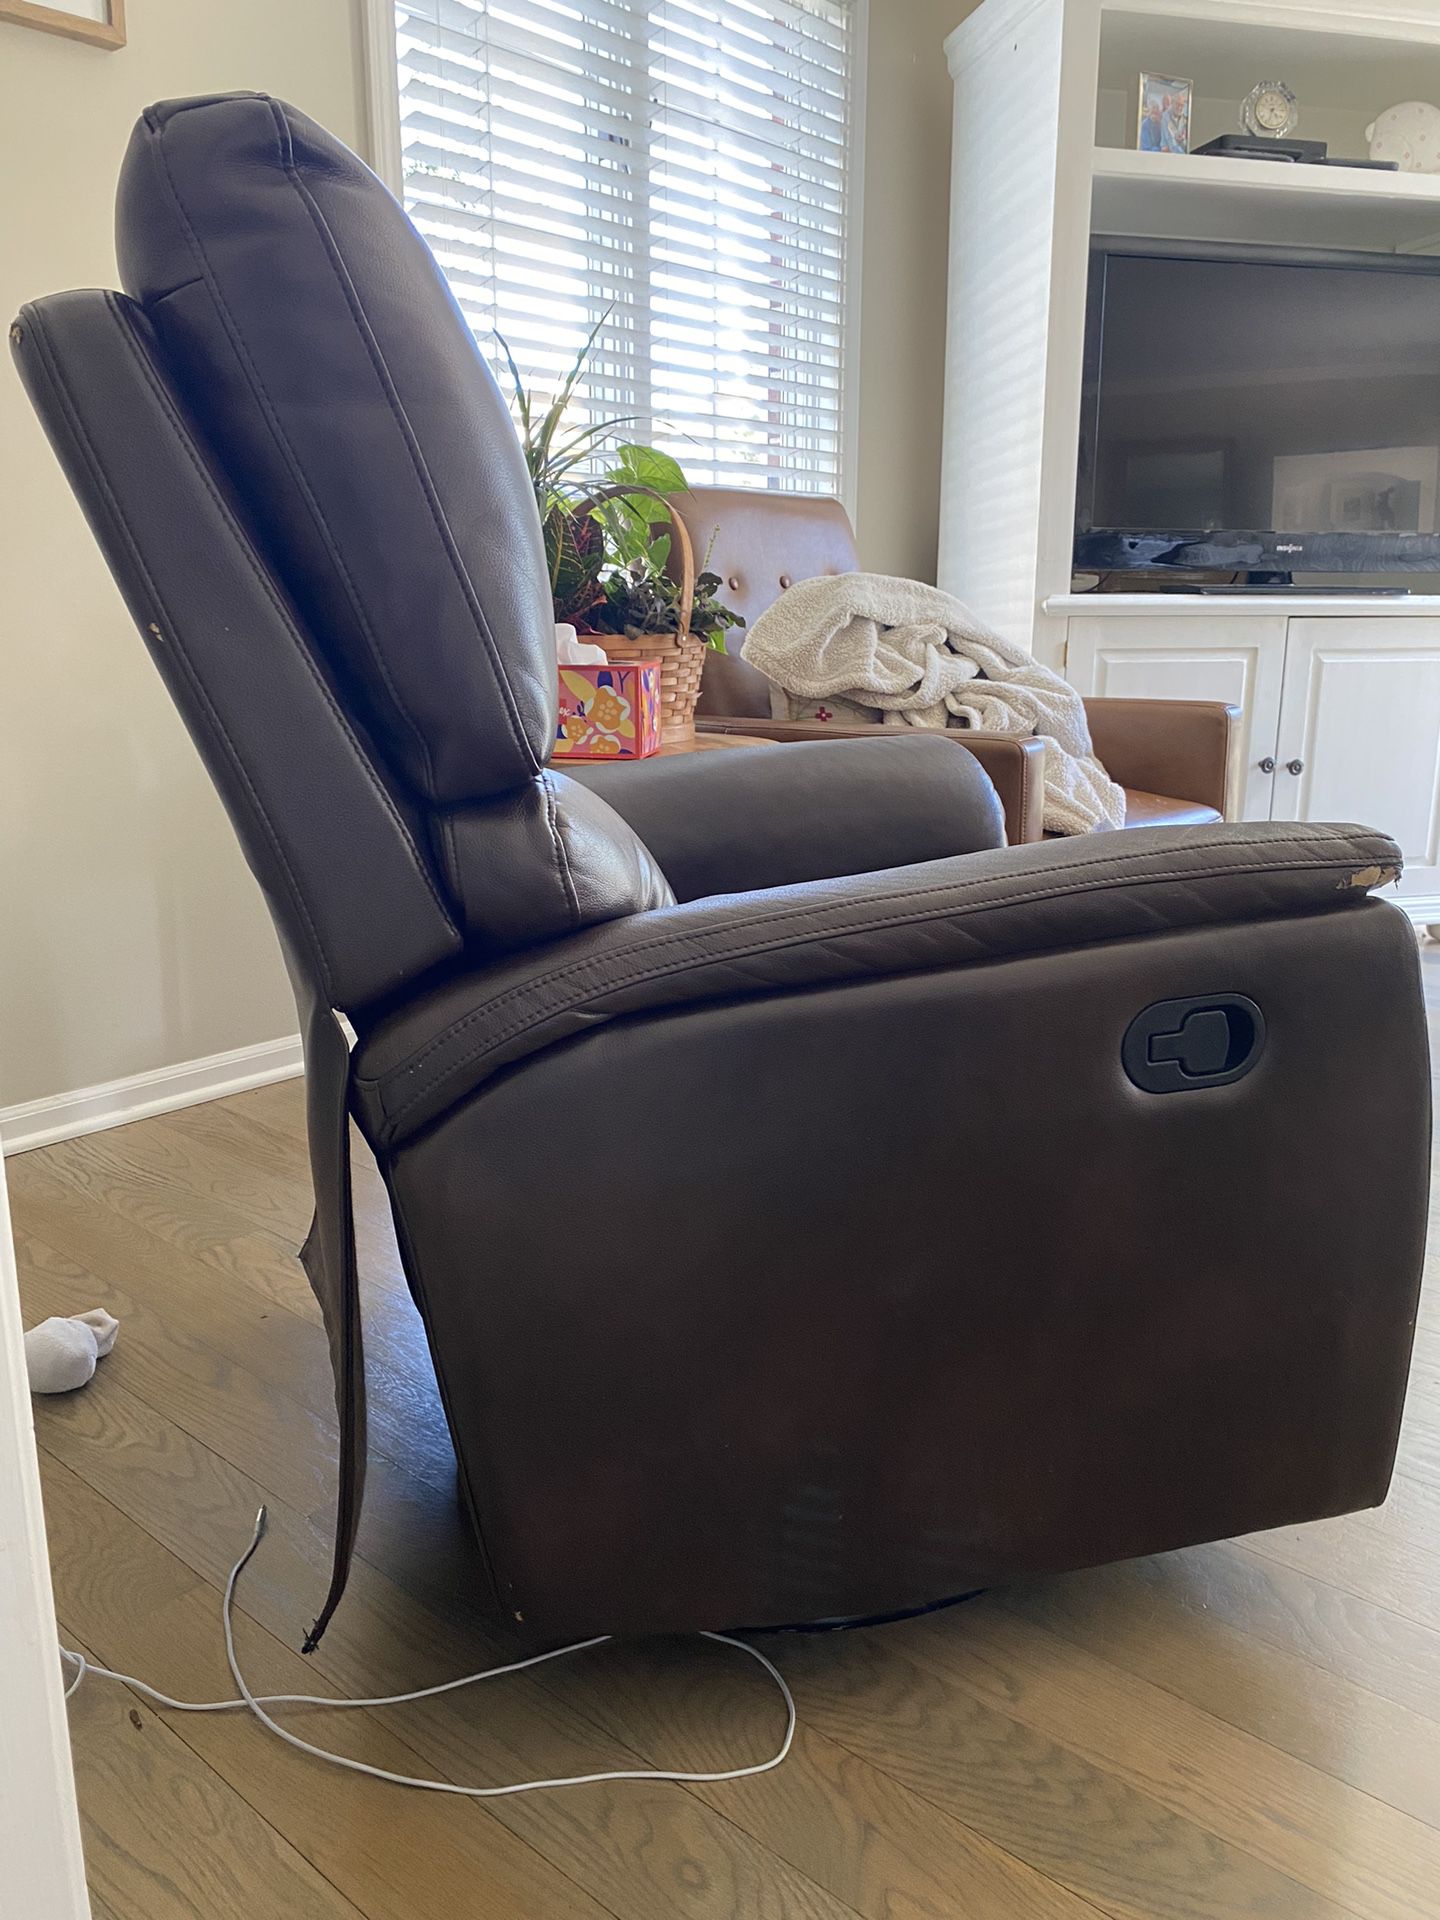 Leather Chair/Recliner